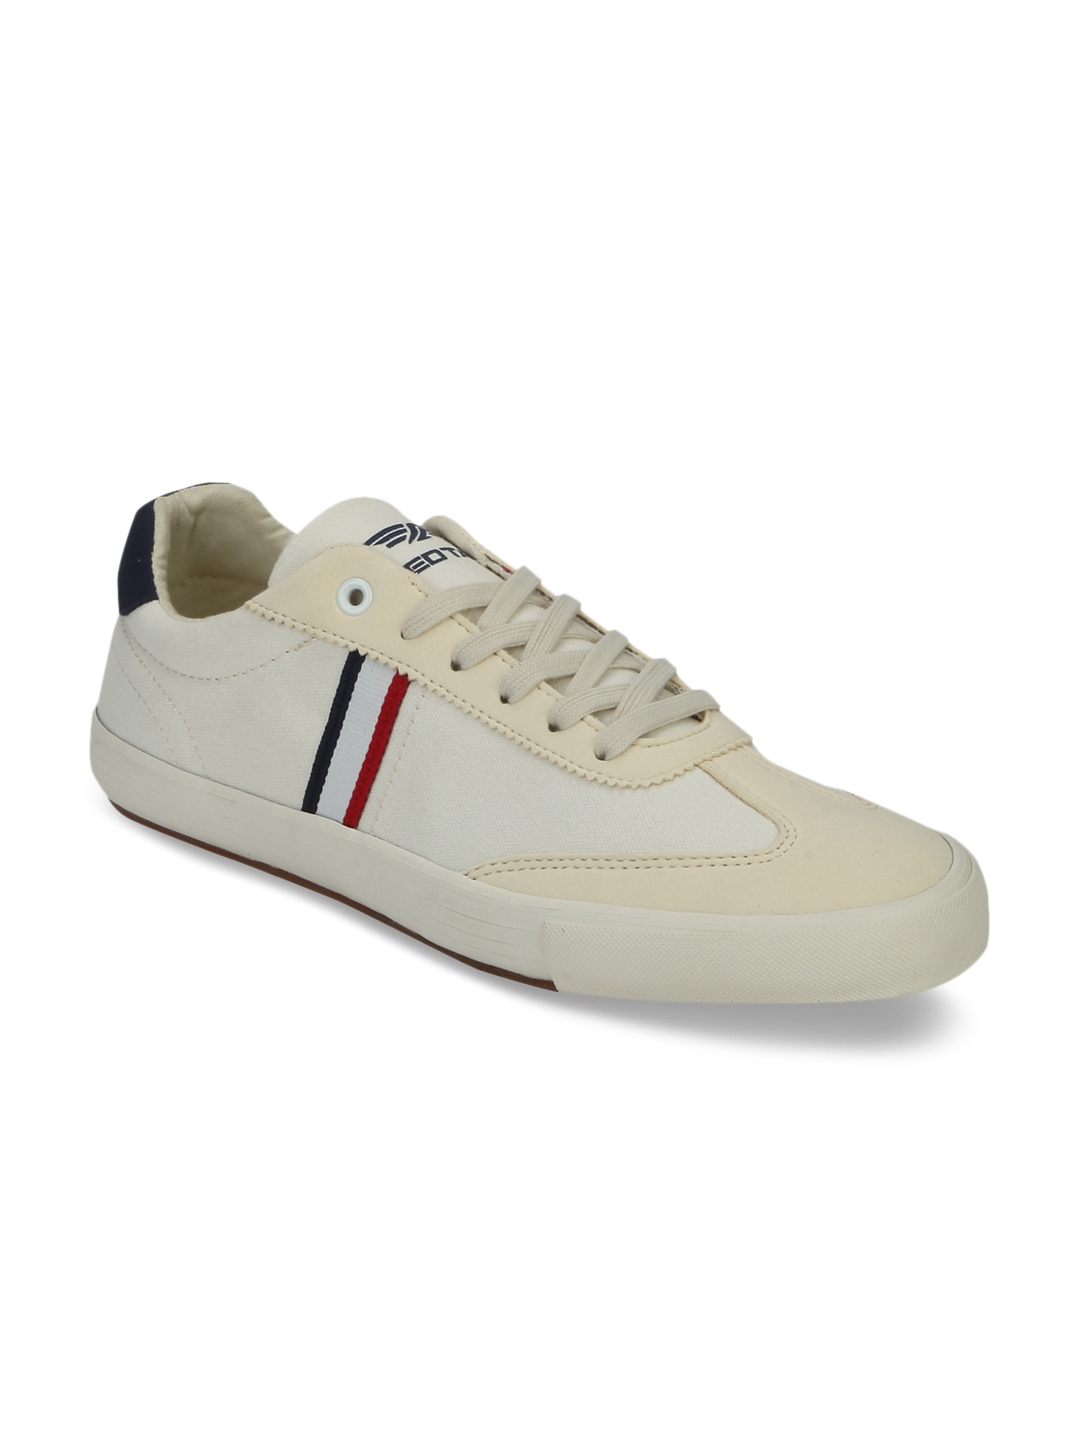 Buy Red Tape Men White Sneakers - Casual Shoes for Men 2194083 | Myntra